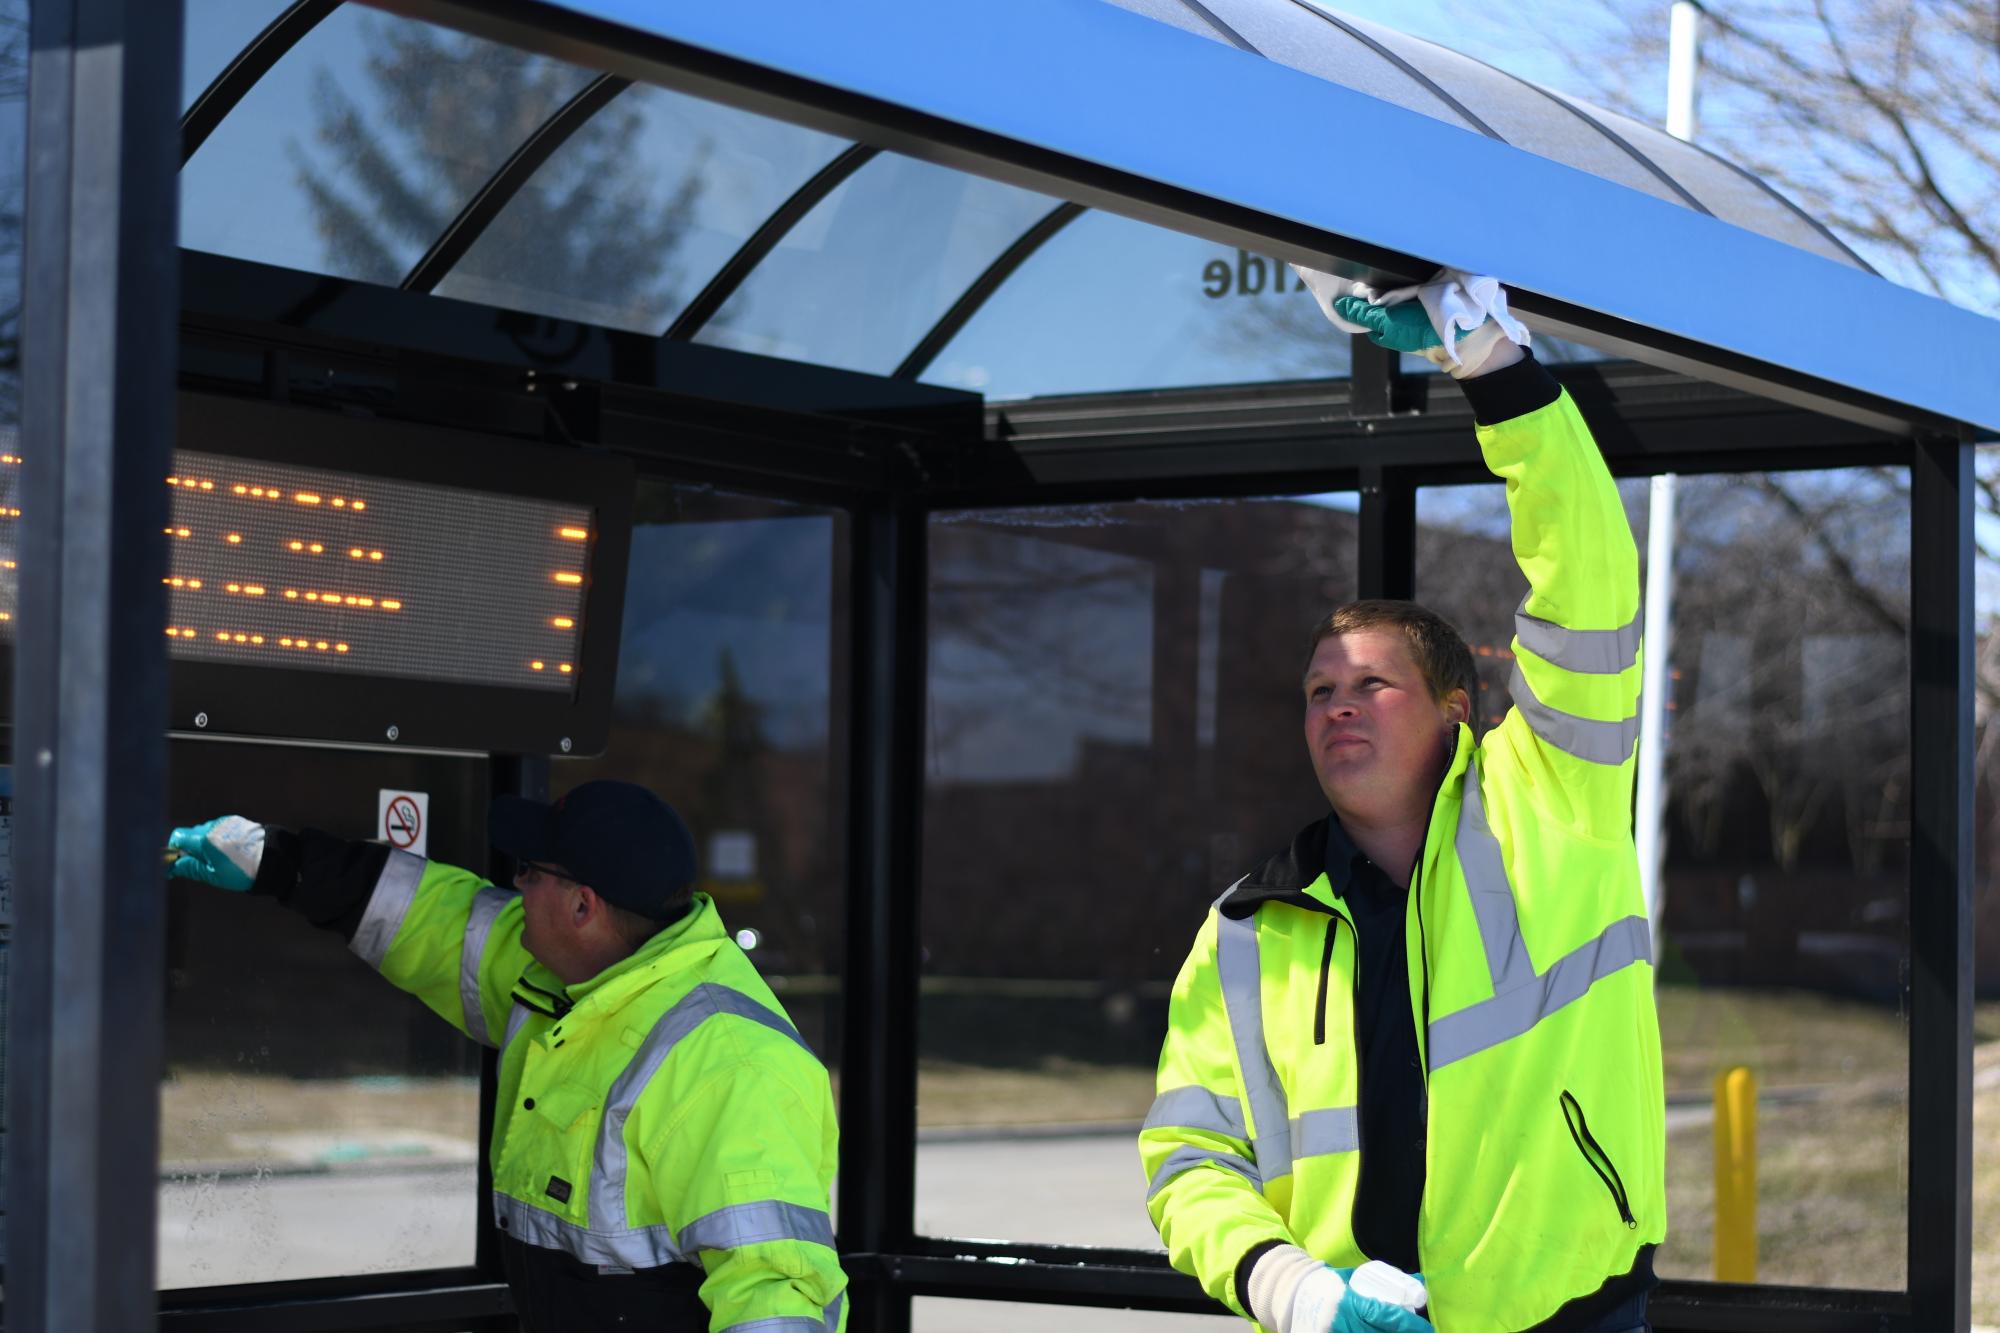 TheRide Facilities team cleans a bus shelter